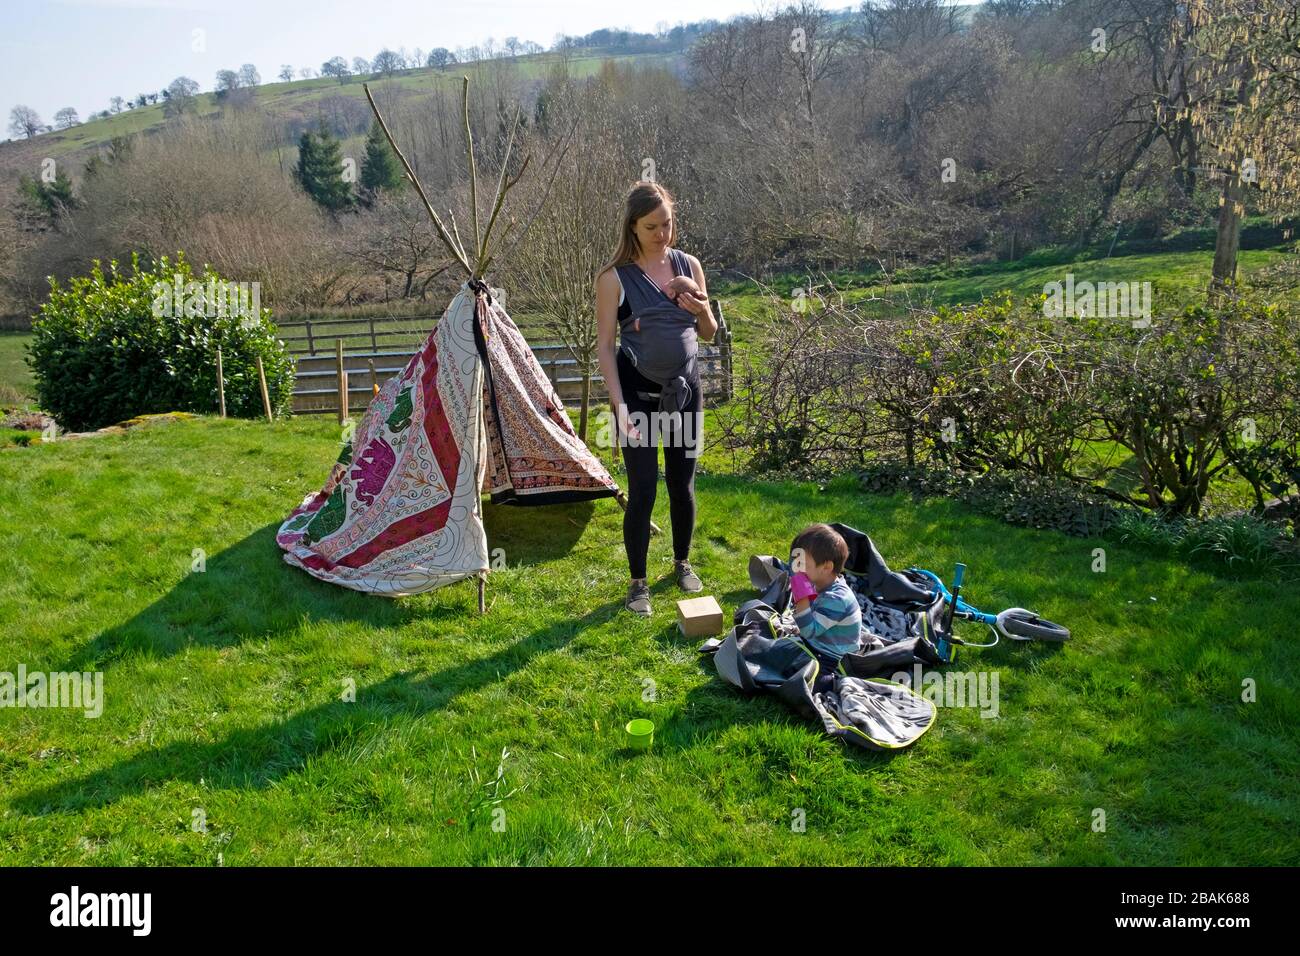 Mother standing with sling baby carrier and child by tipi tent playing in a country garden during Covid-19 outbreak spring 2020 Wales UK KATHY DEWITT Stock Photo